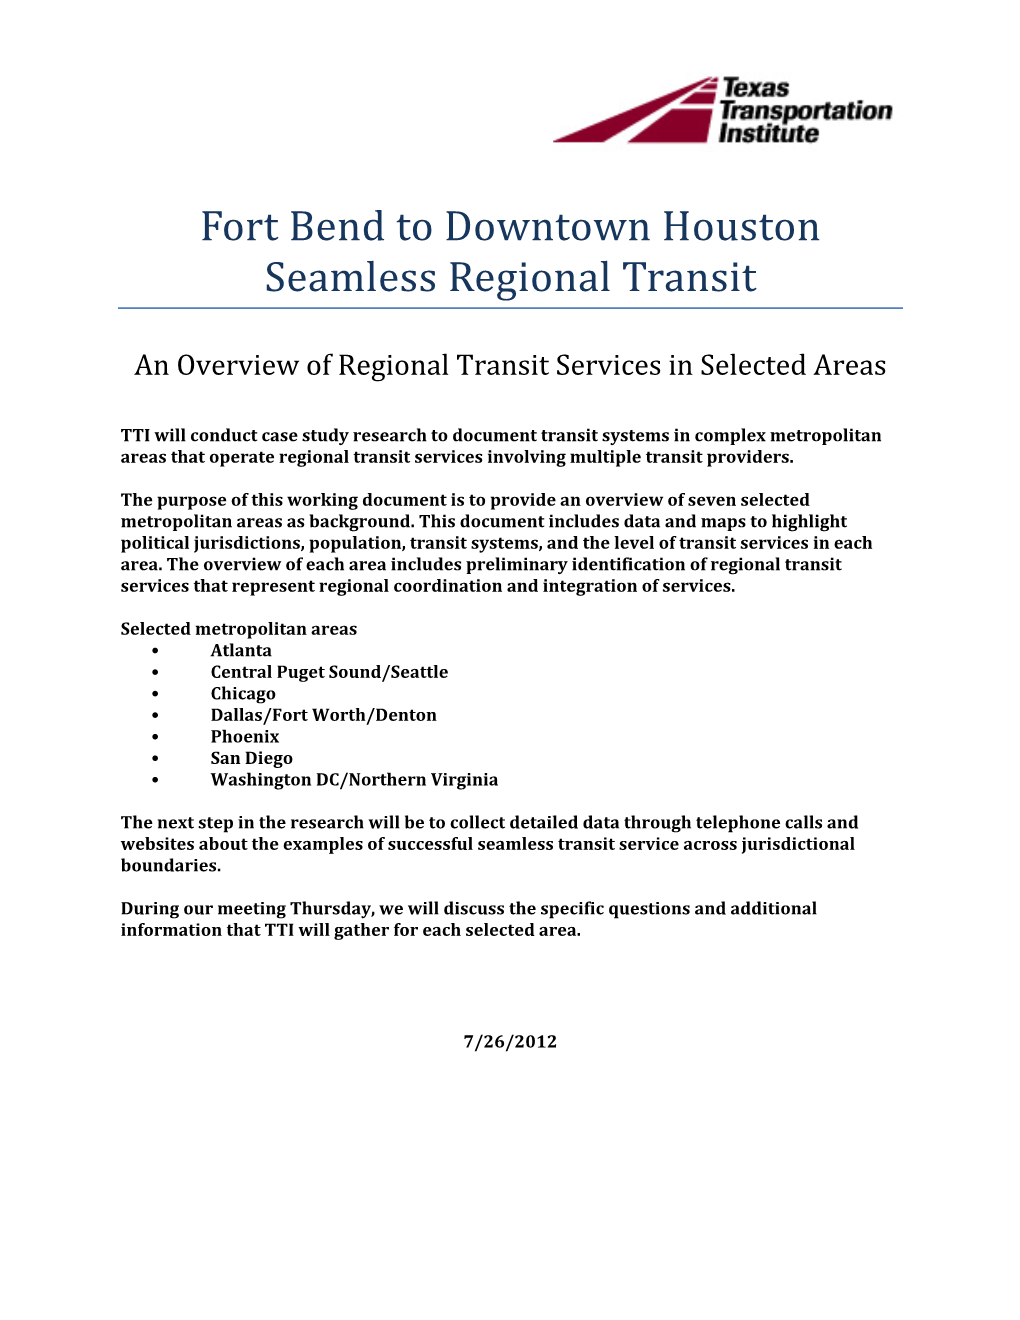 Fort Bend to Downtown Houston Seamless Regional Transit